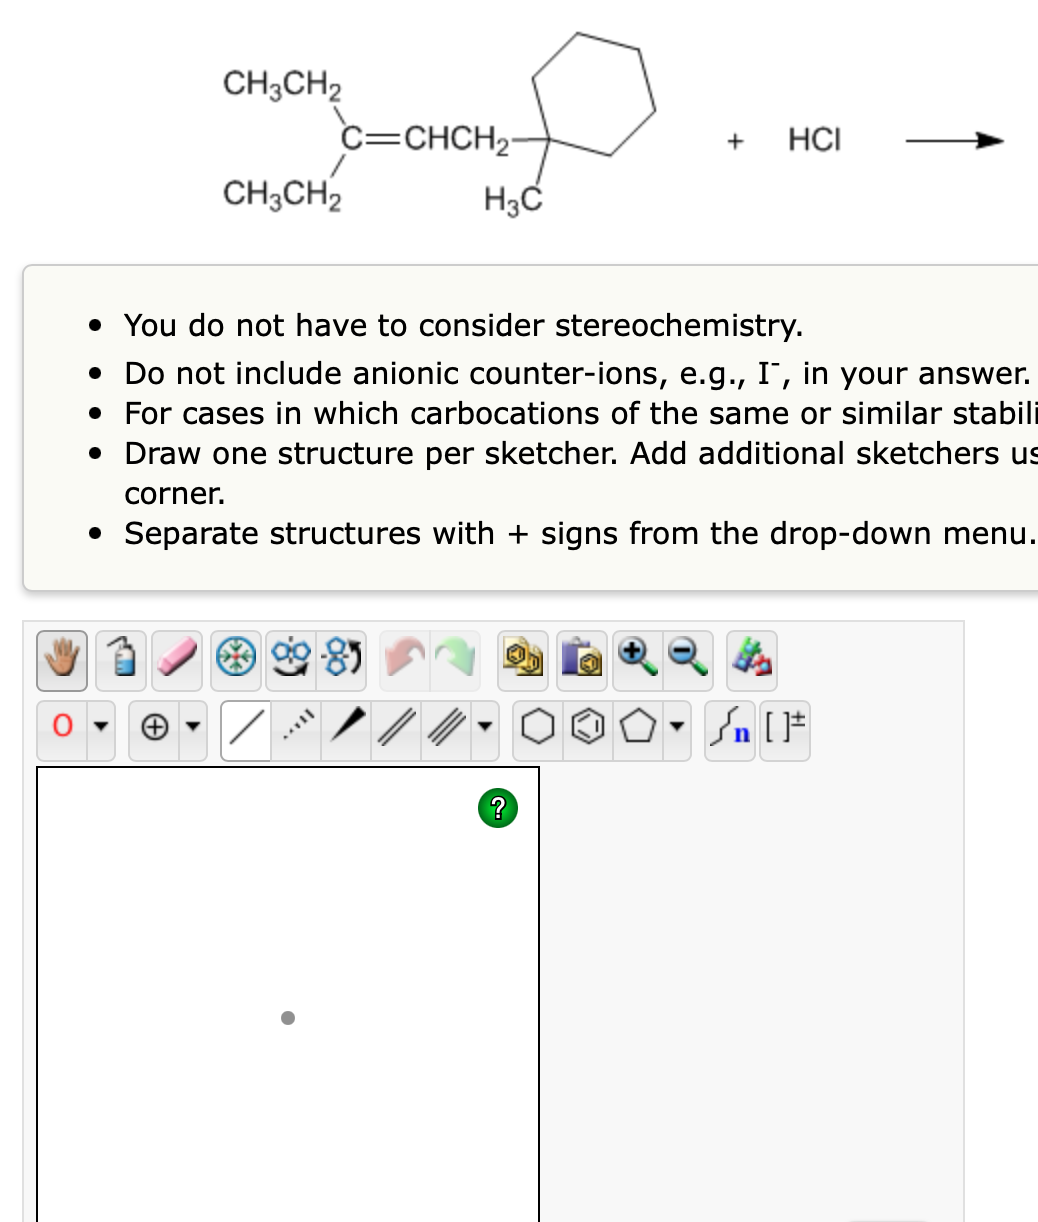 CH3CH2
c=CHCH2-
HCI
+
CH;CH2
• You do not have to consider stereochemistry.
• Do not include anionic counter-ions, e.g., I, in your answer.
• For cases in which carbocations of the same or similar stabili
• Draw one structure per sketcher. Add additional sketchers us
corner.
• Separate structures with + signs from the drop-down menu.
